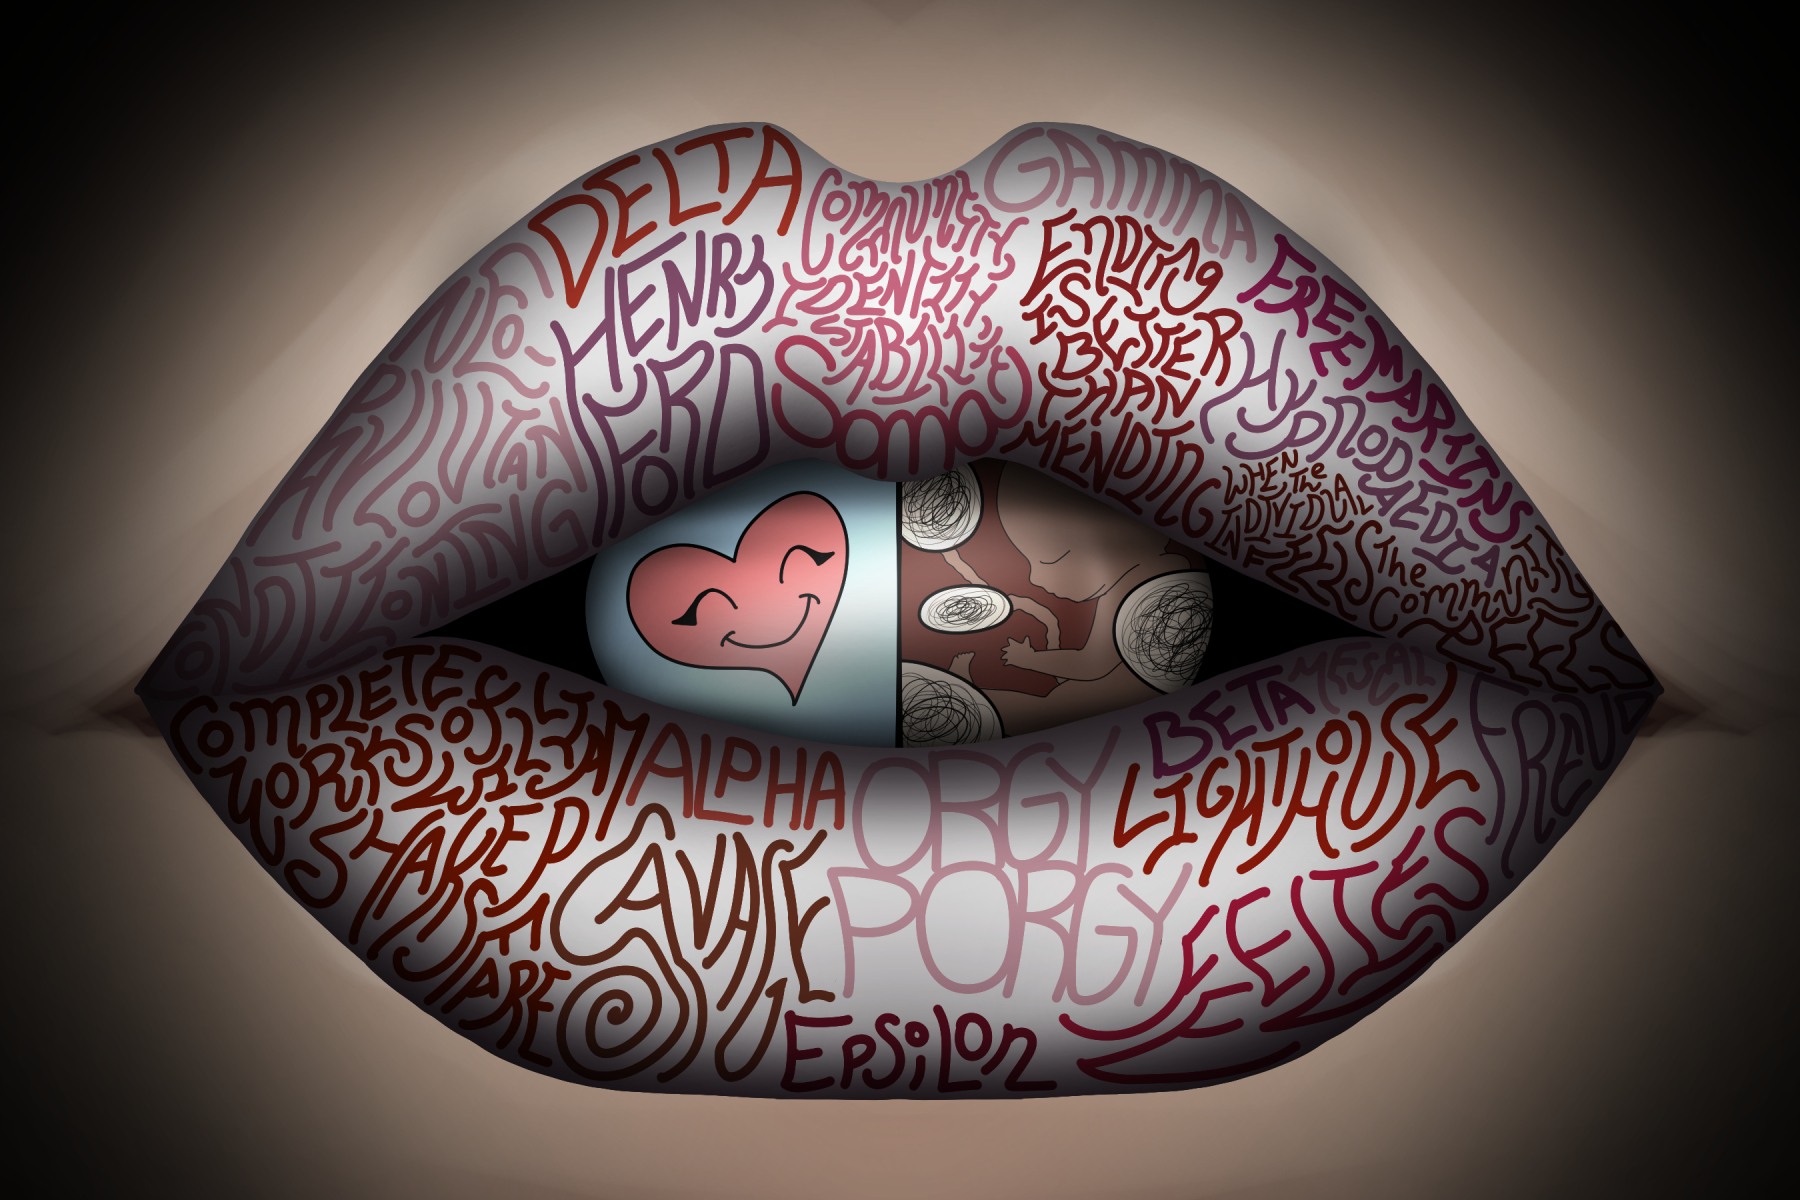 Illustration of a woman's lips with writing and images.